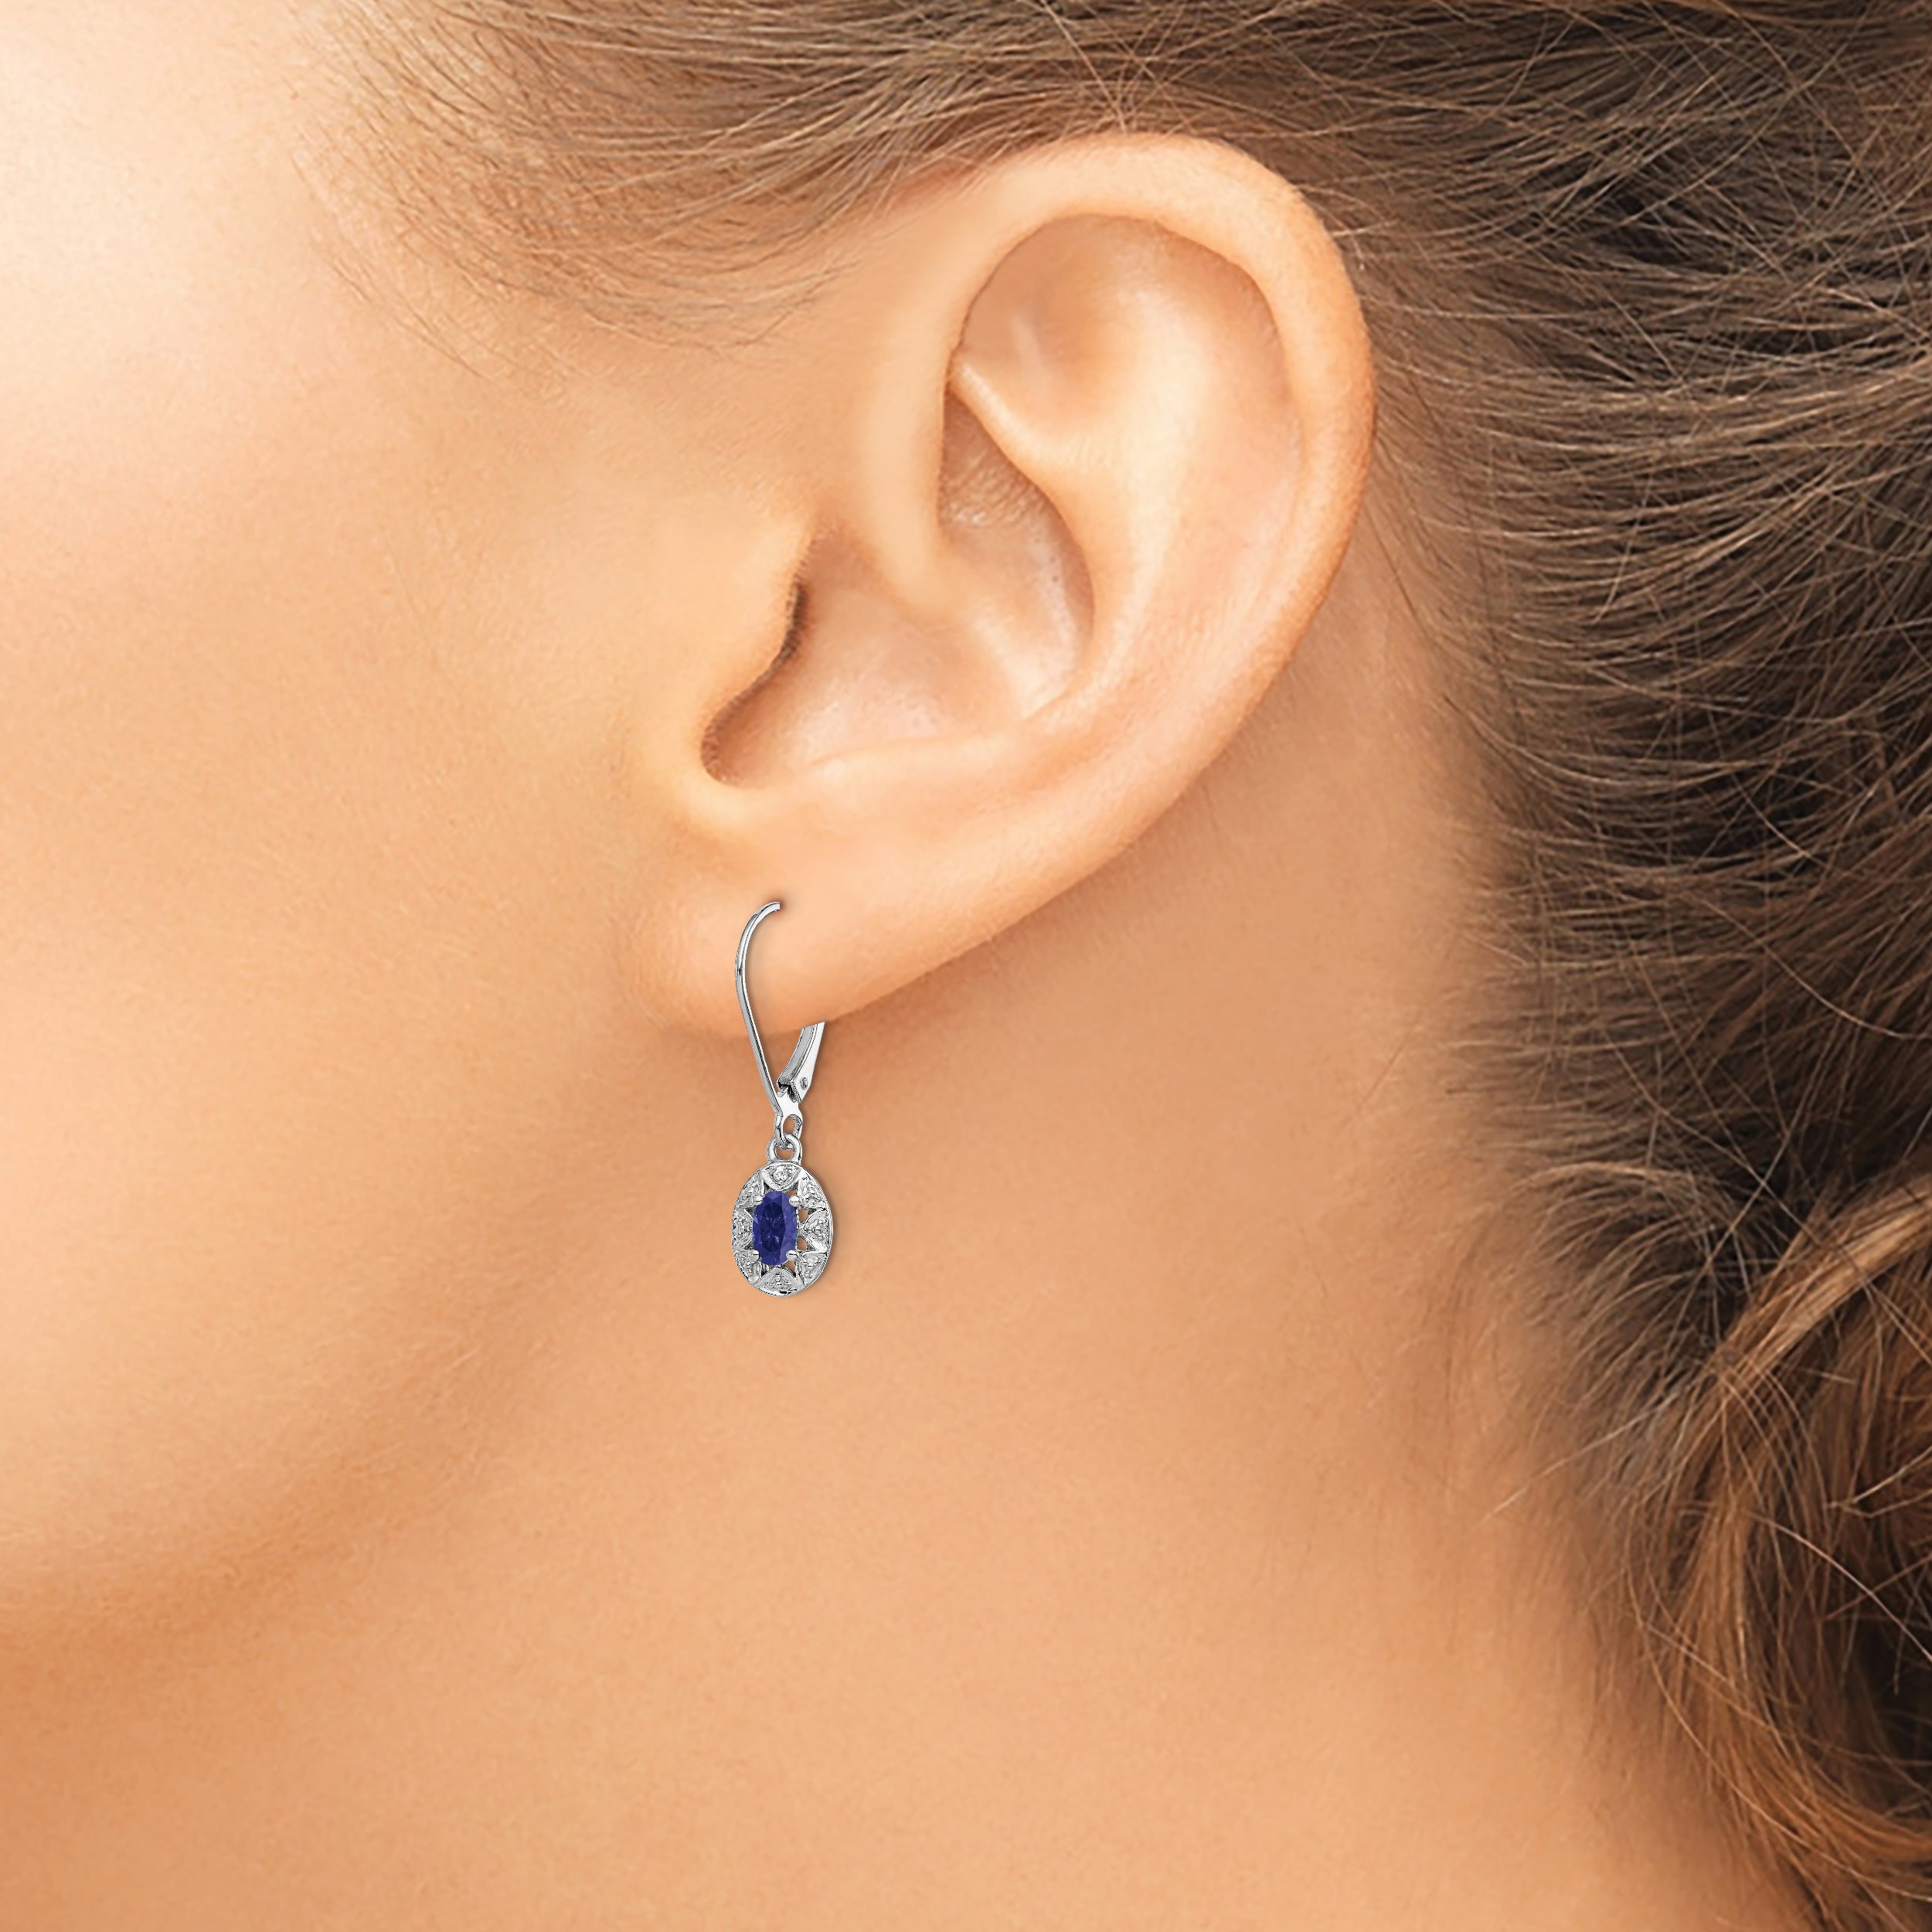 Sterling Silver Rhodium-plated Diam. & Created Sapphire Earrings